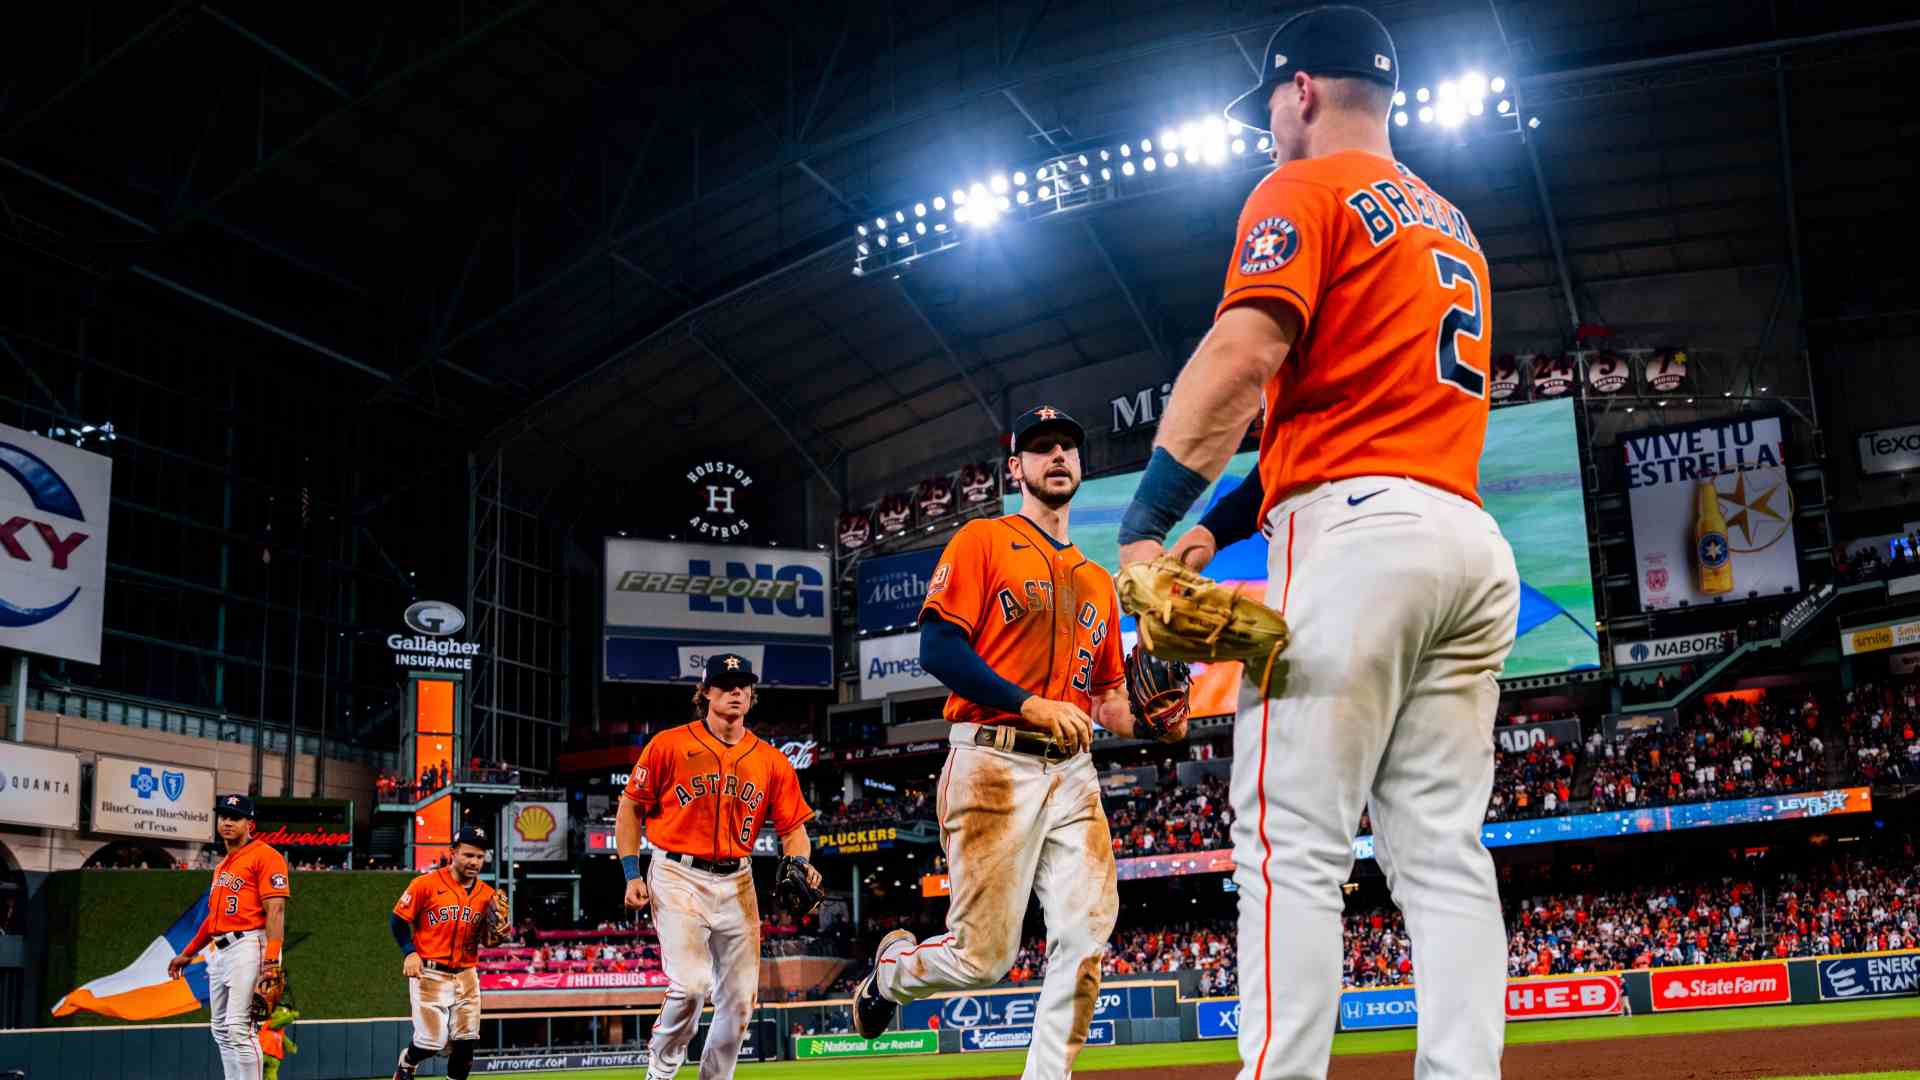 Houston Astros vs Los Angeles Angels Live Stream, Schedule, 2 July 2022